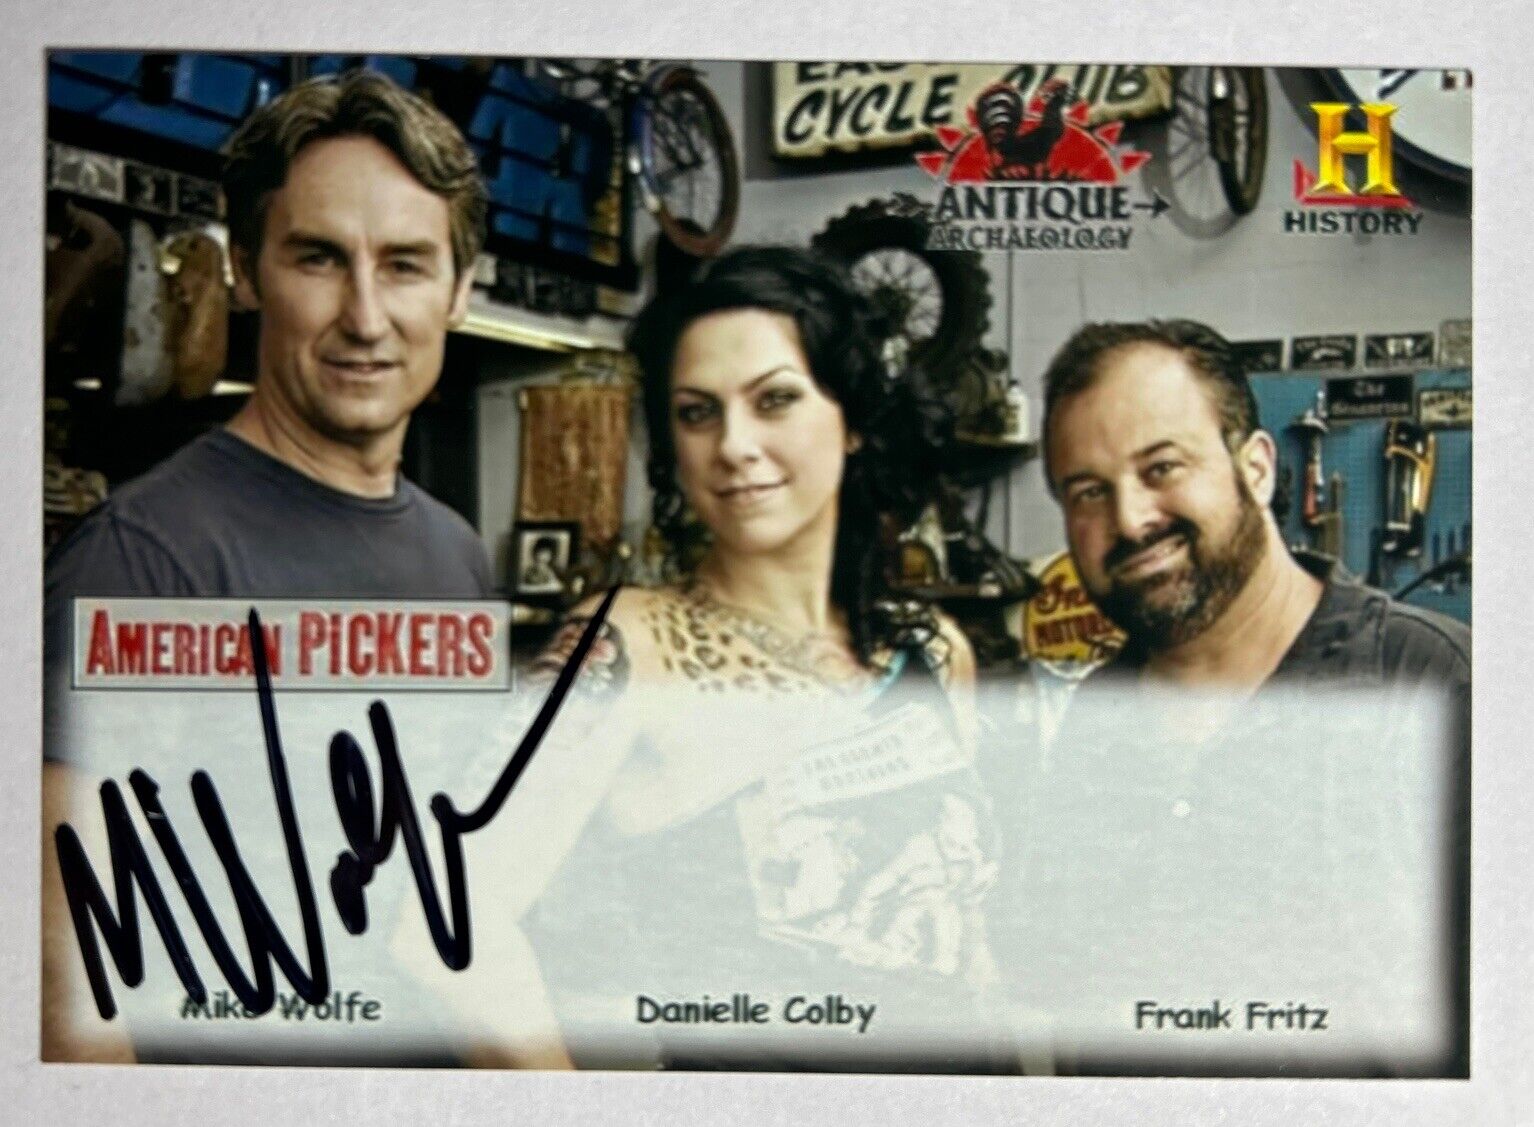 Mike Wolfe Autograph Small Photo Card - American Pickers History Channel Signed